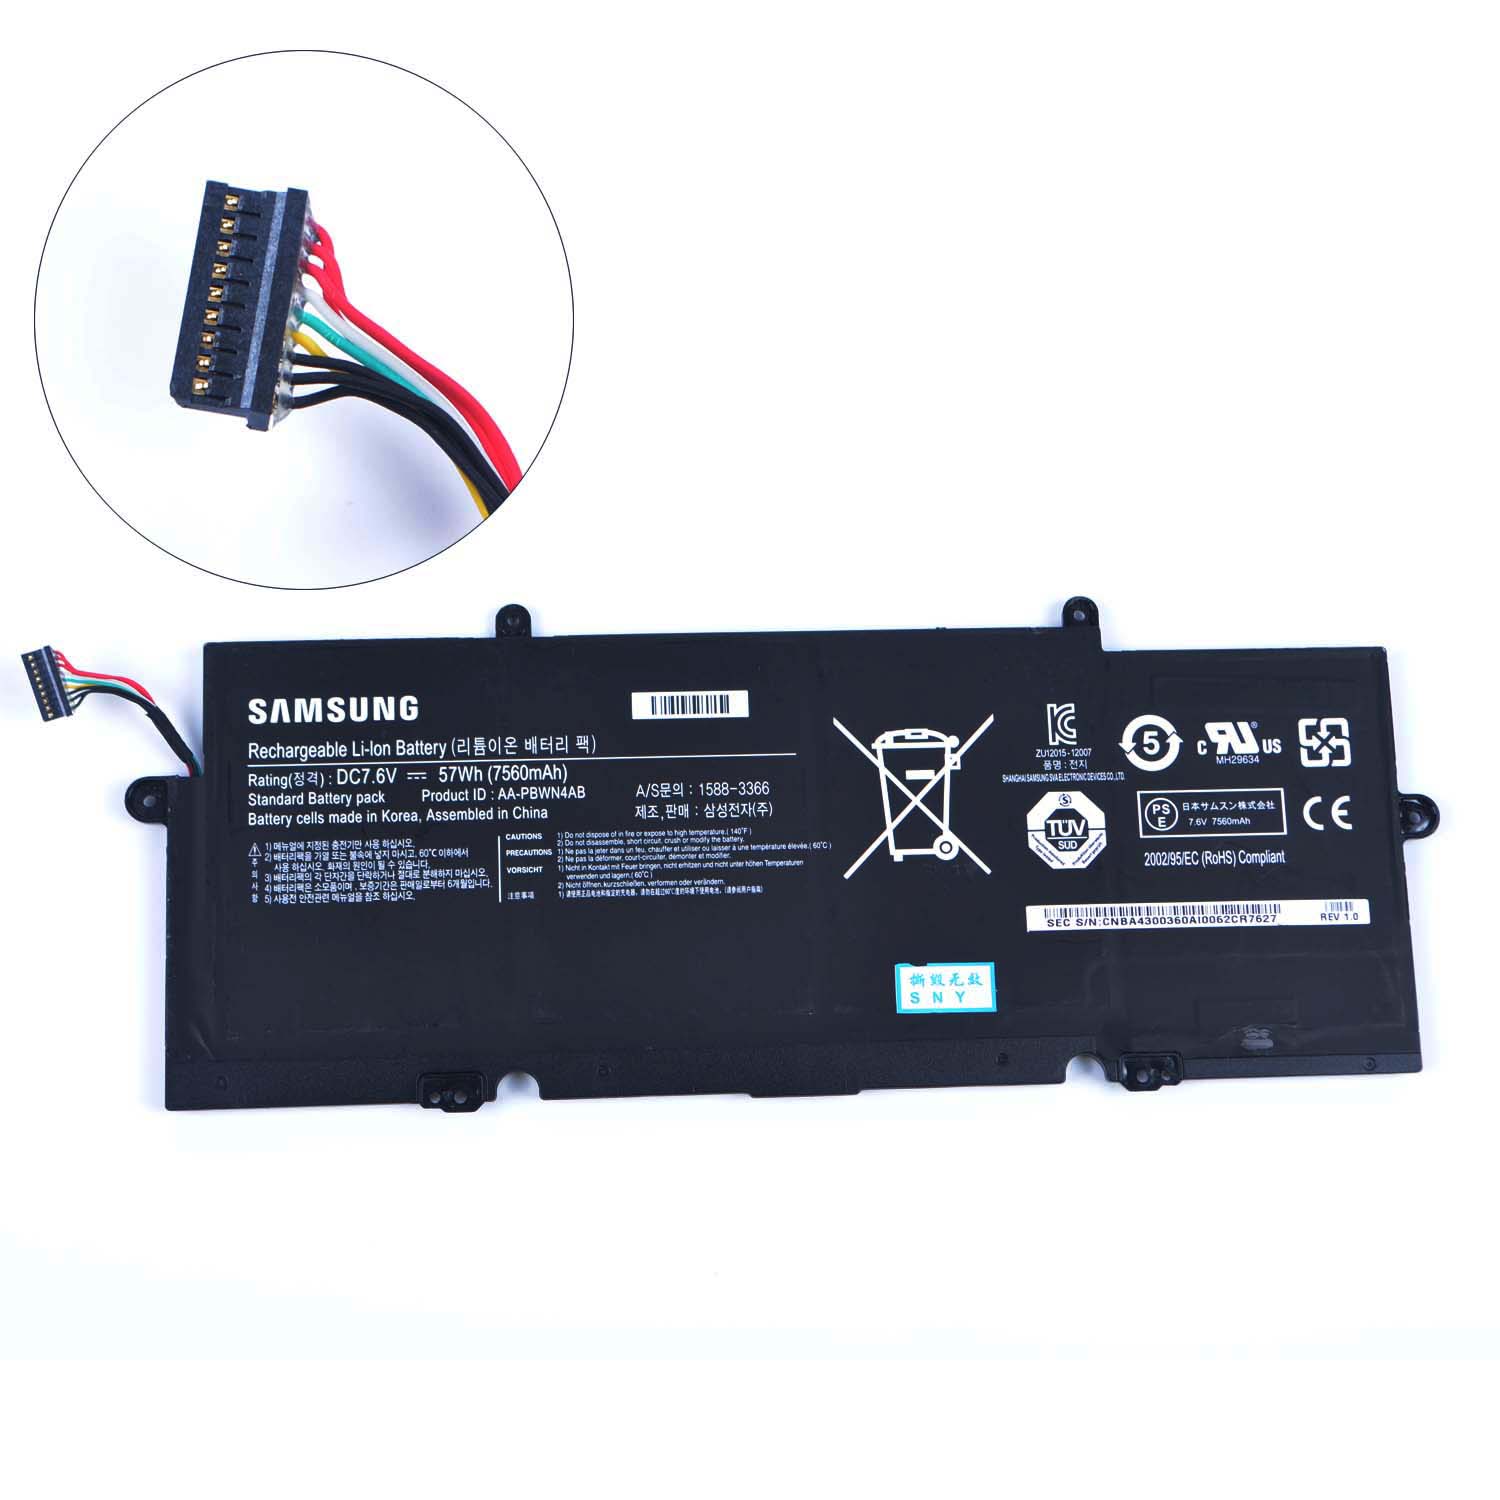 Replacement Battery for Samsung Samsung 530U4E battery